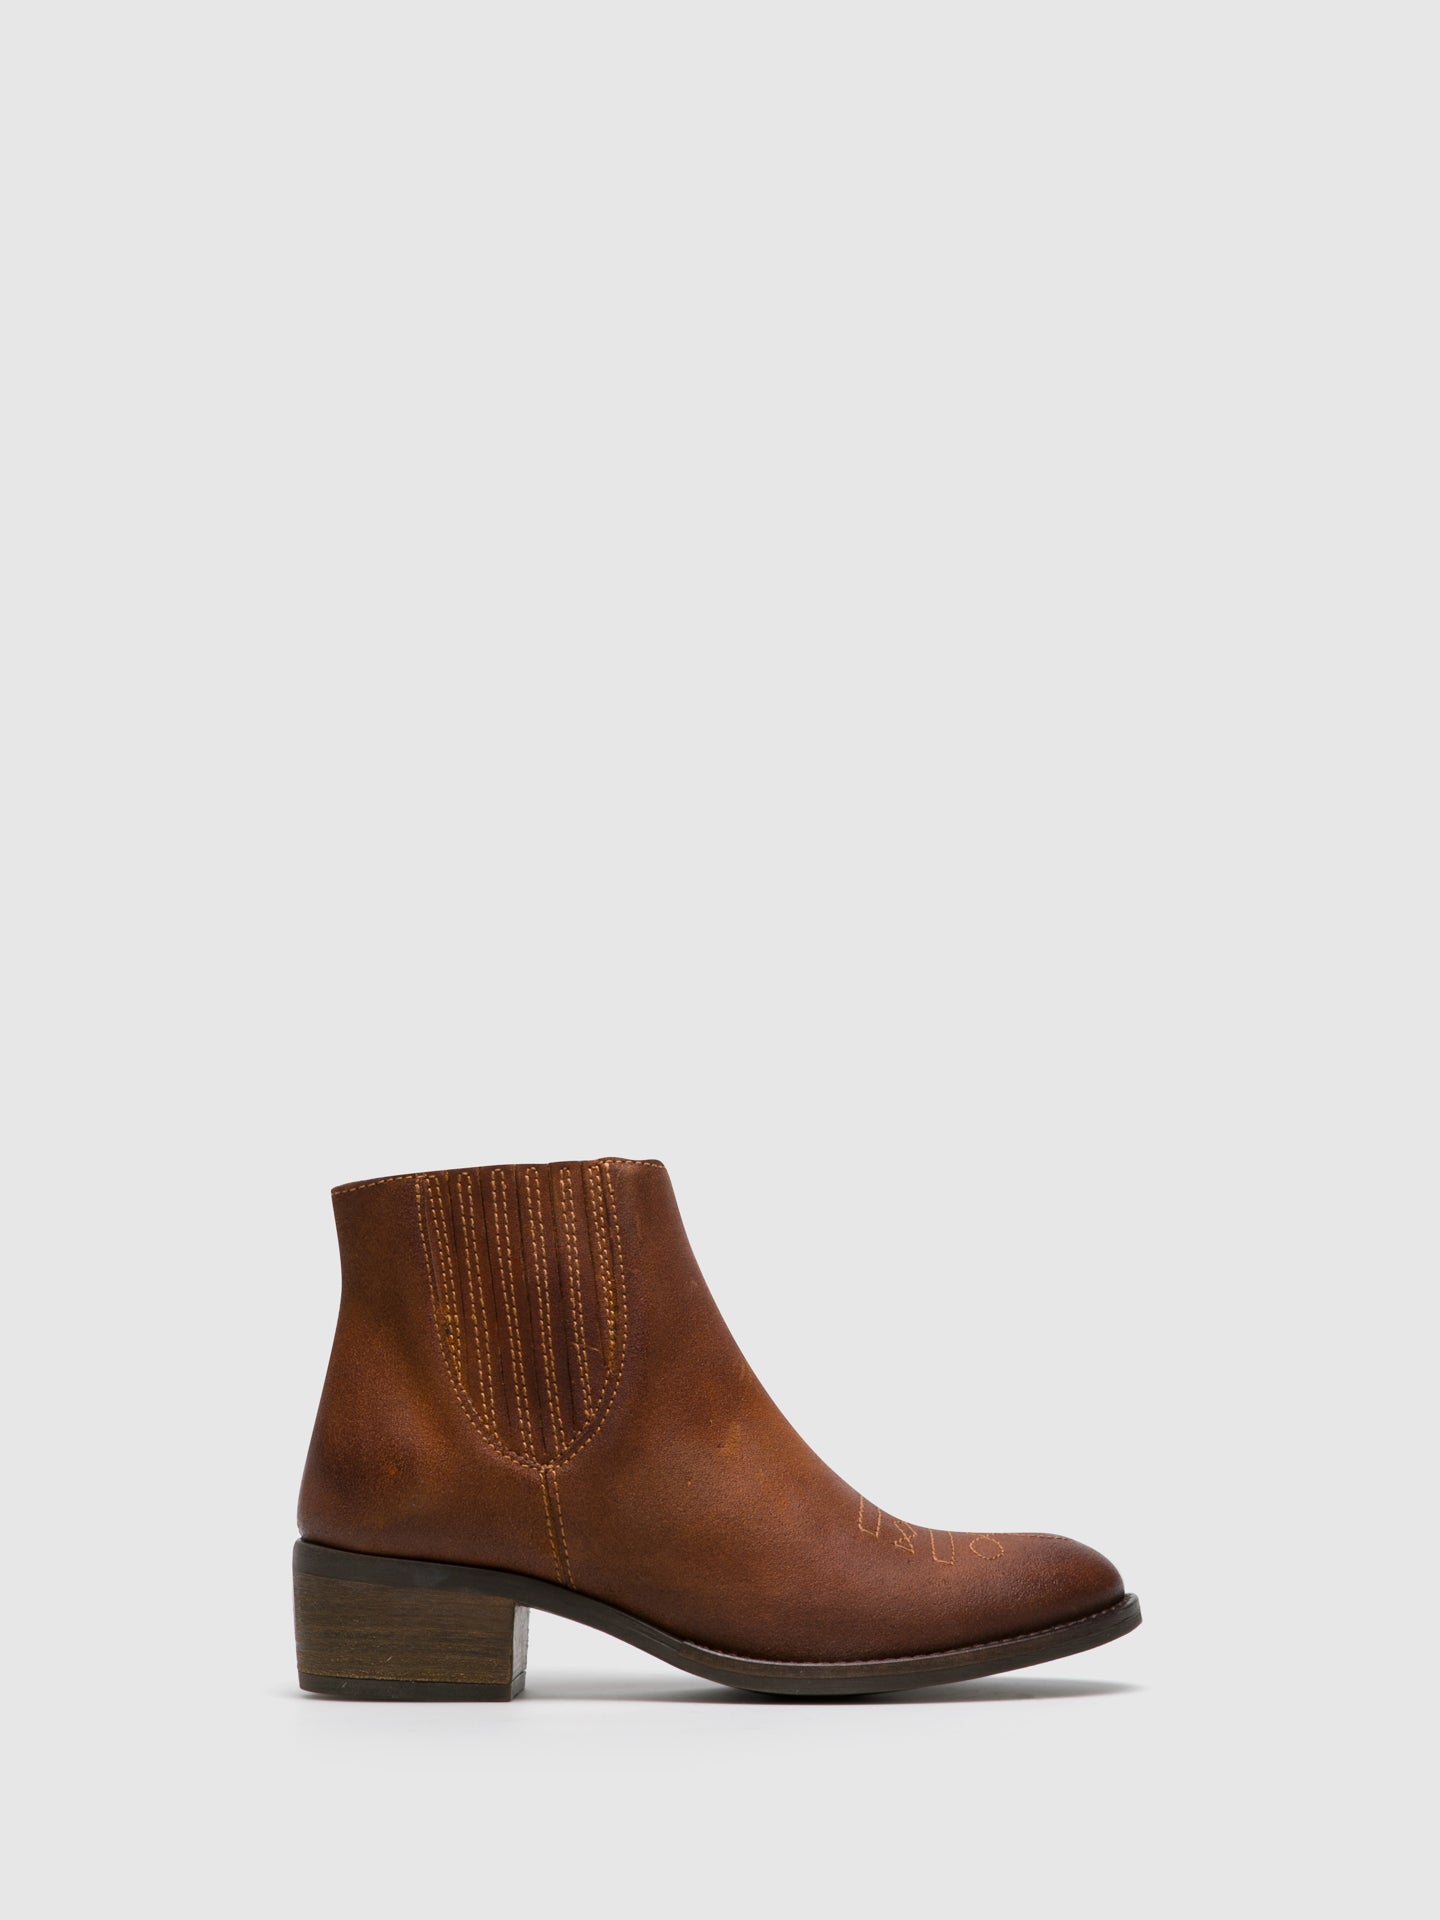 Foreva Sienna Elasticated Ankle Boots